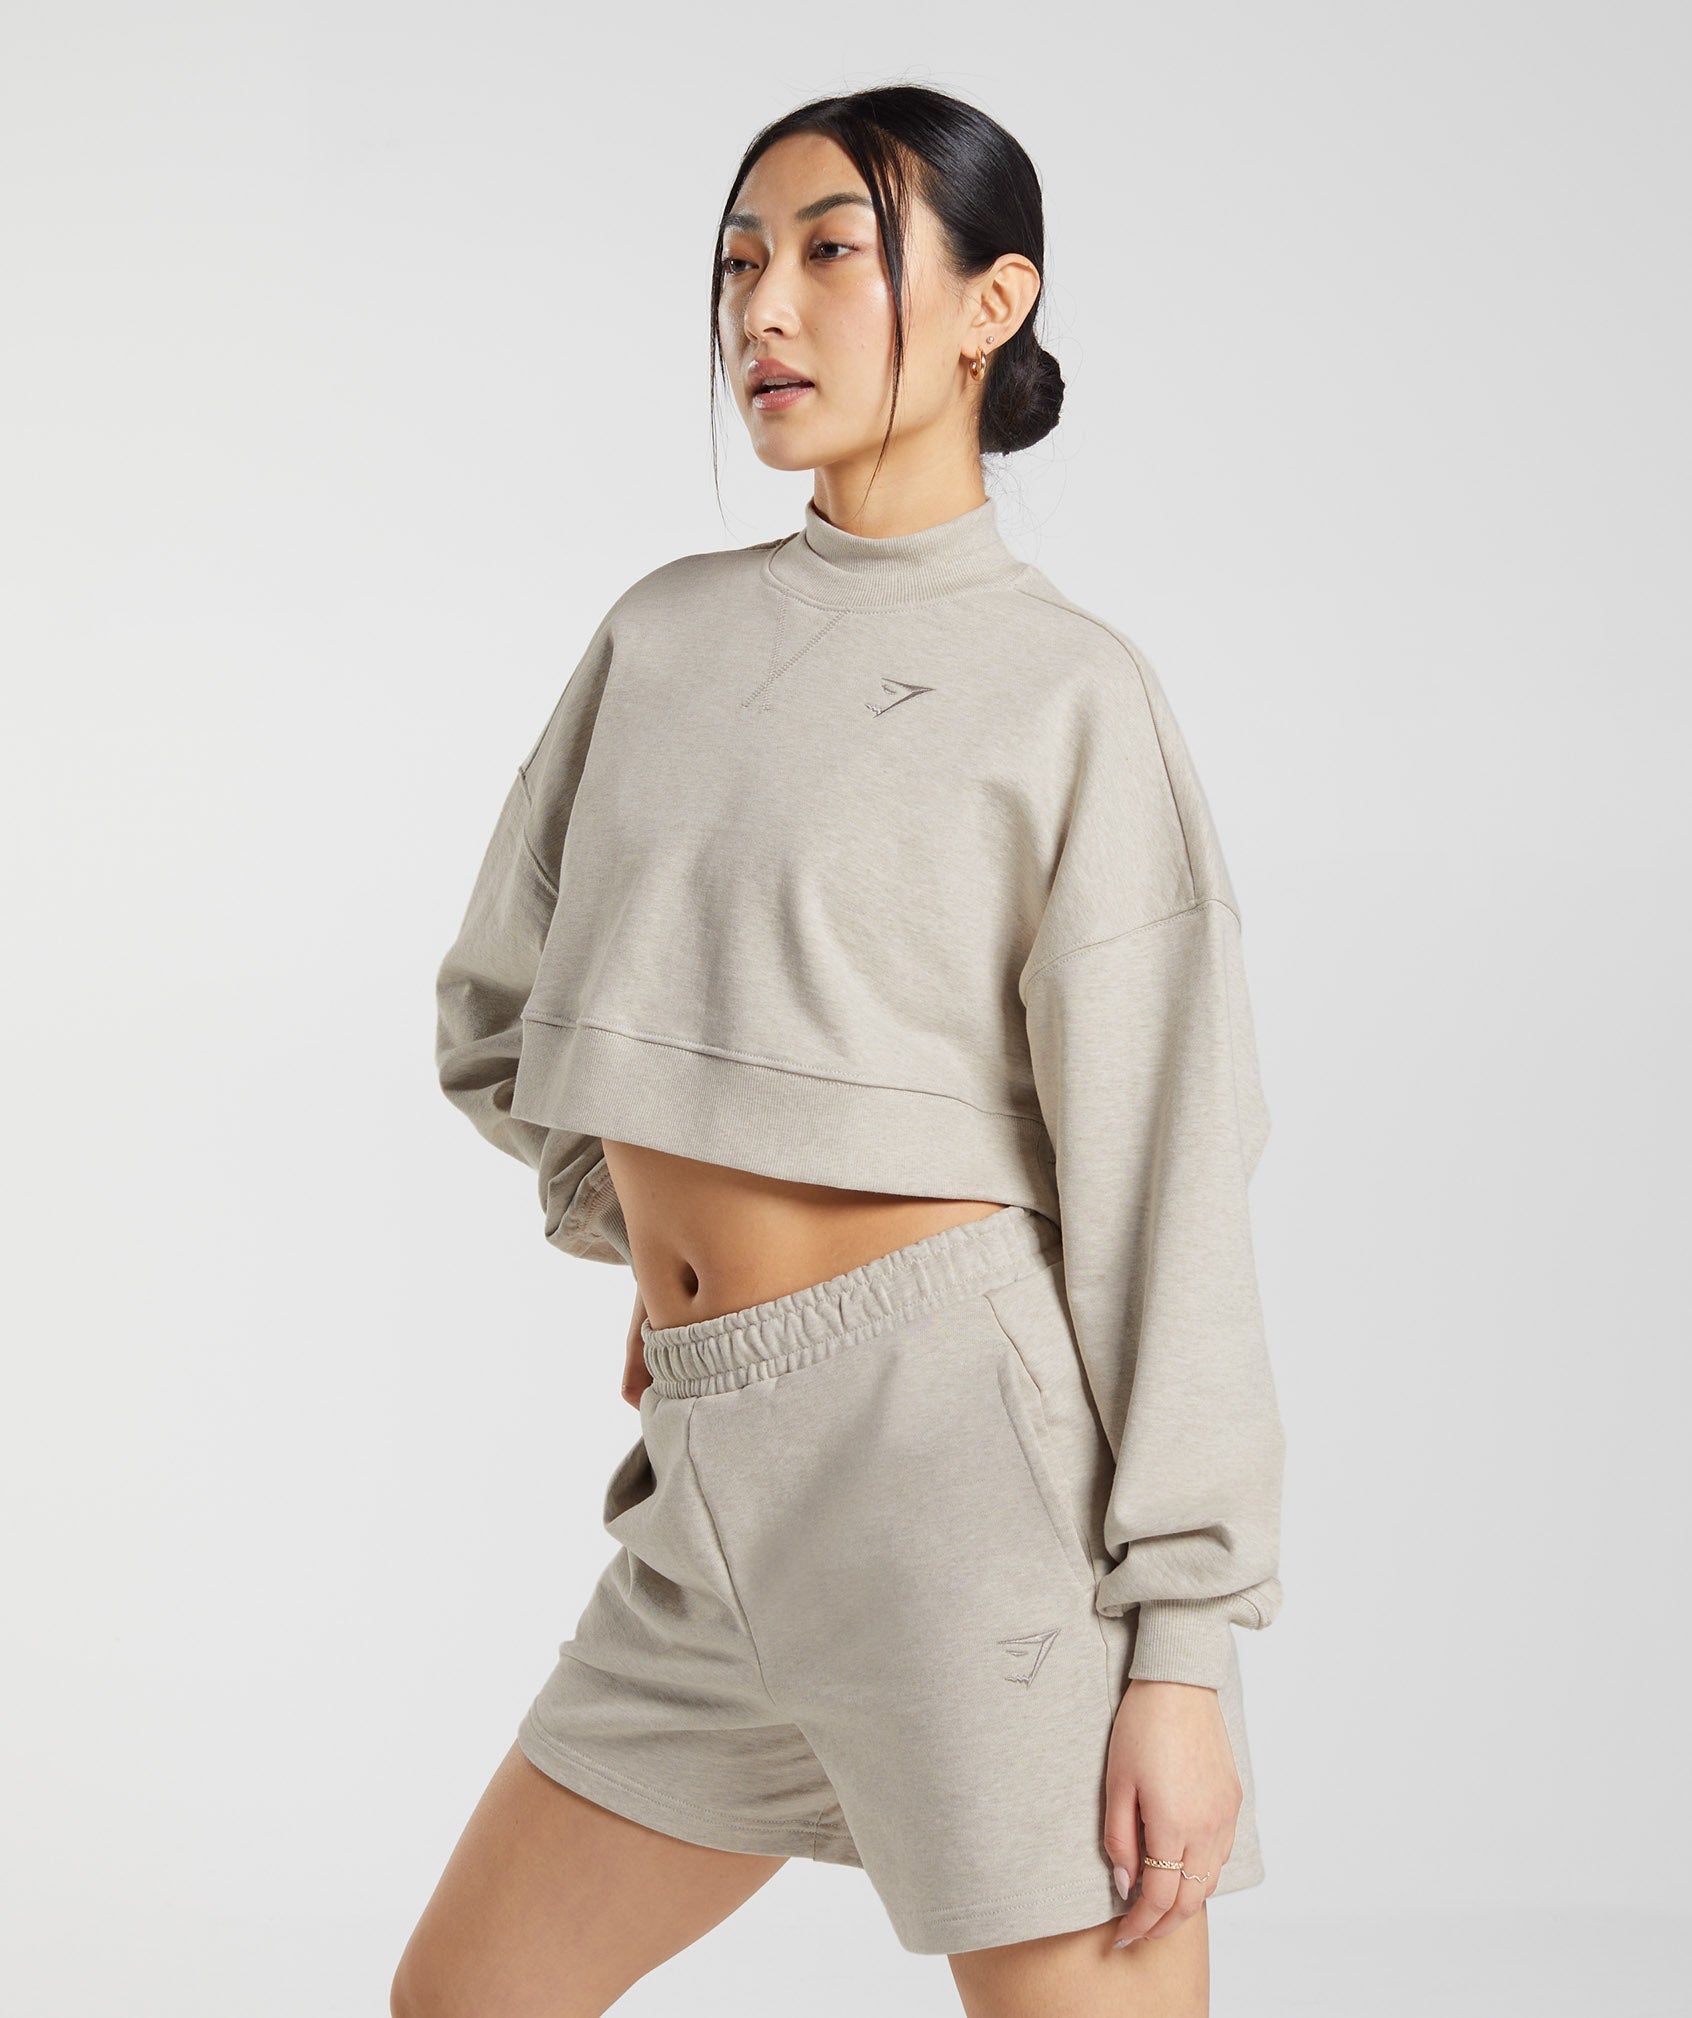 Rest Day Sweats Cropped Pullover in Sand Marl - view 3